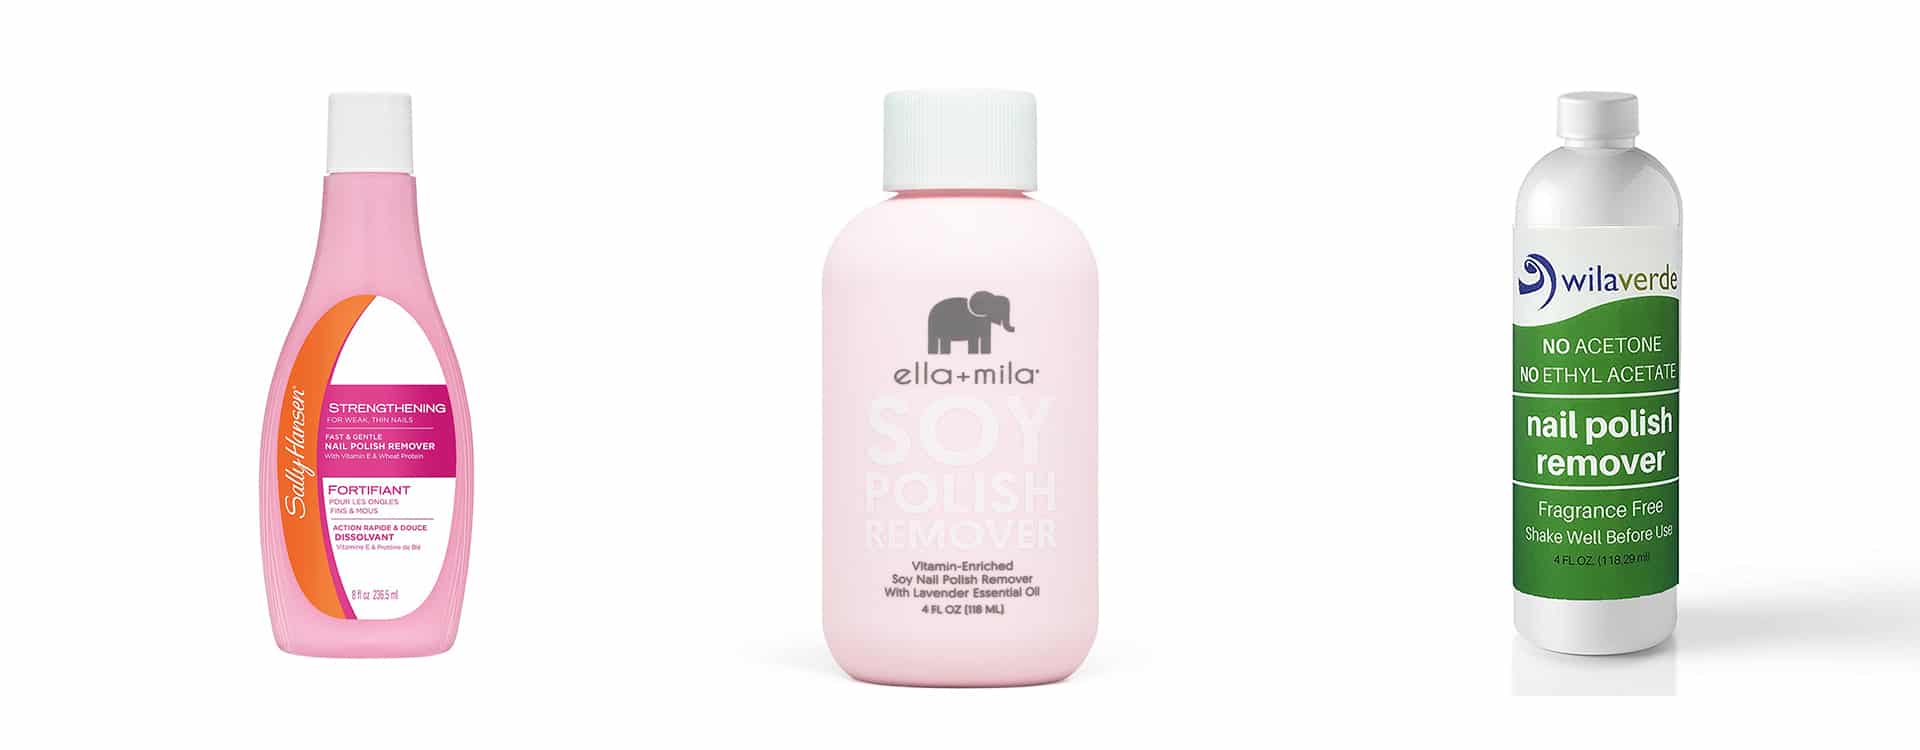 best nail polish remover reviews 2020 feature img